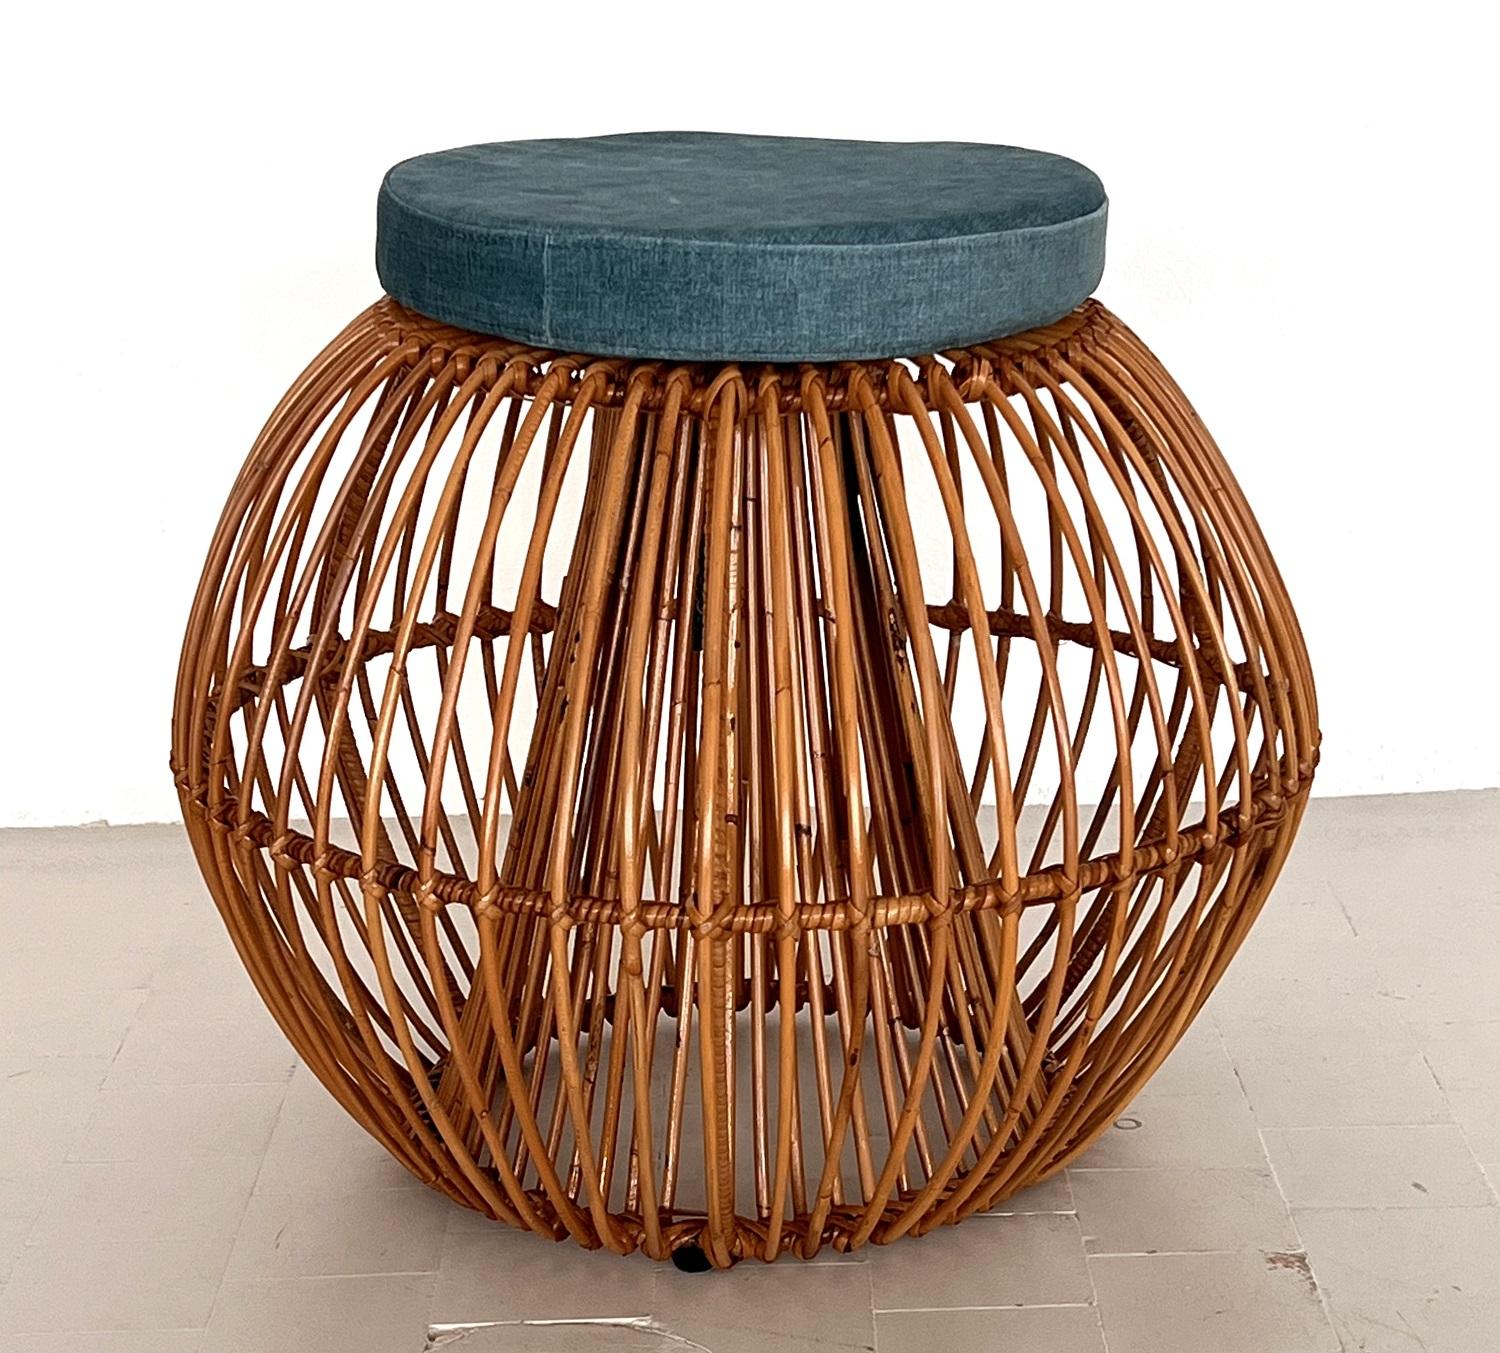 Janine Abraham & Dirk Jan Rol Midcentury Bamboo Stool with new cushion, 1960s For Sale 2